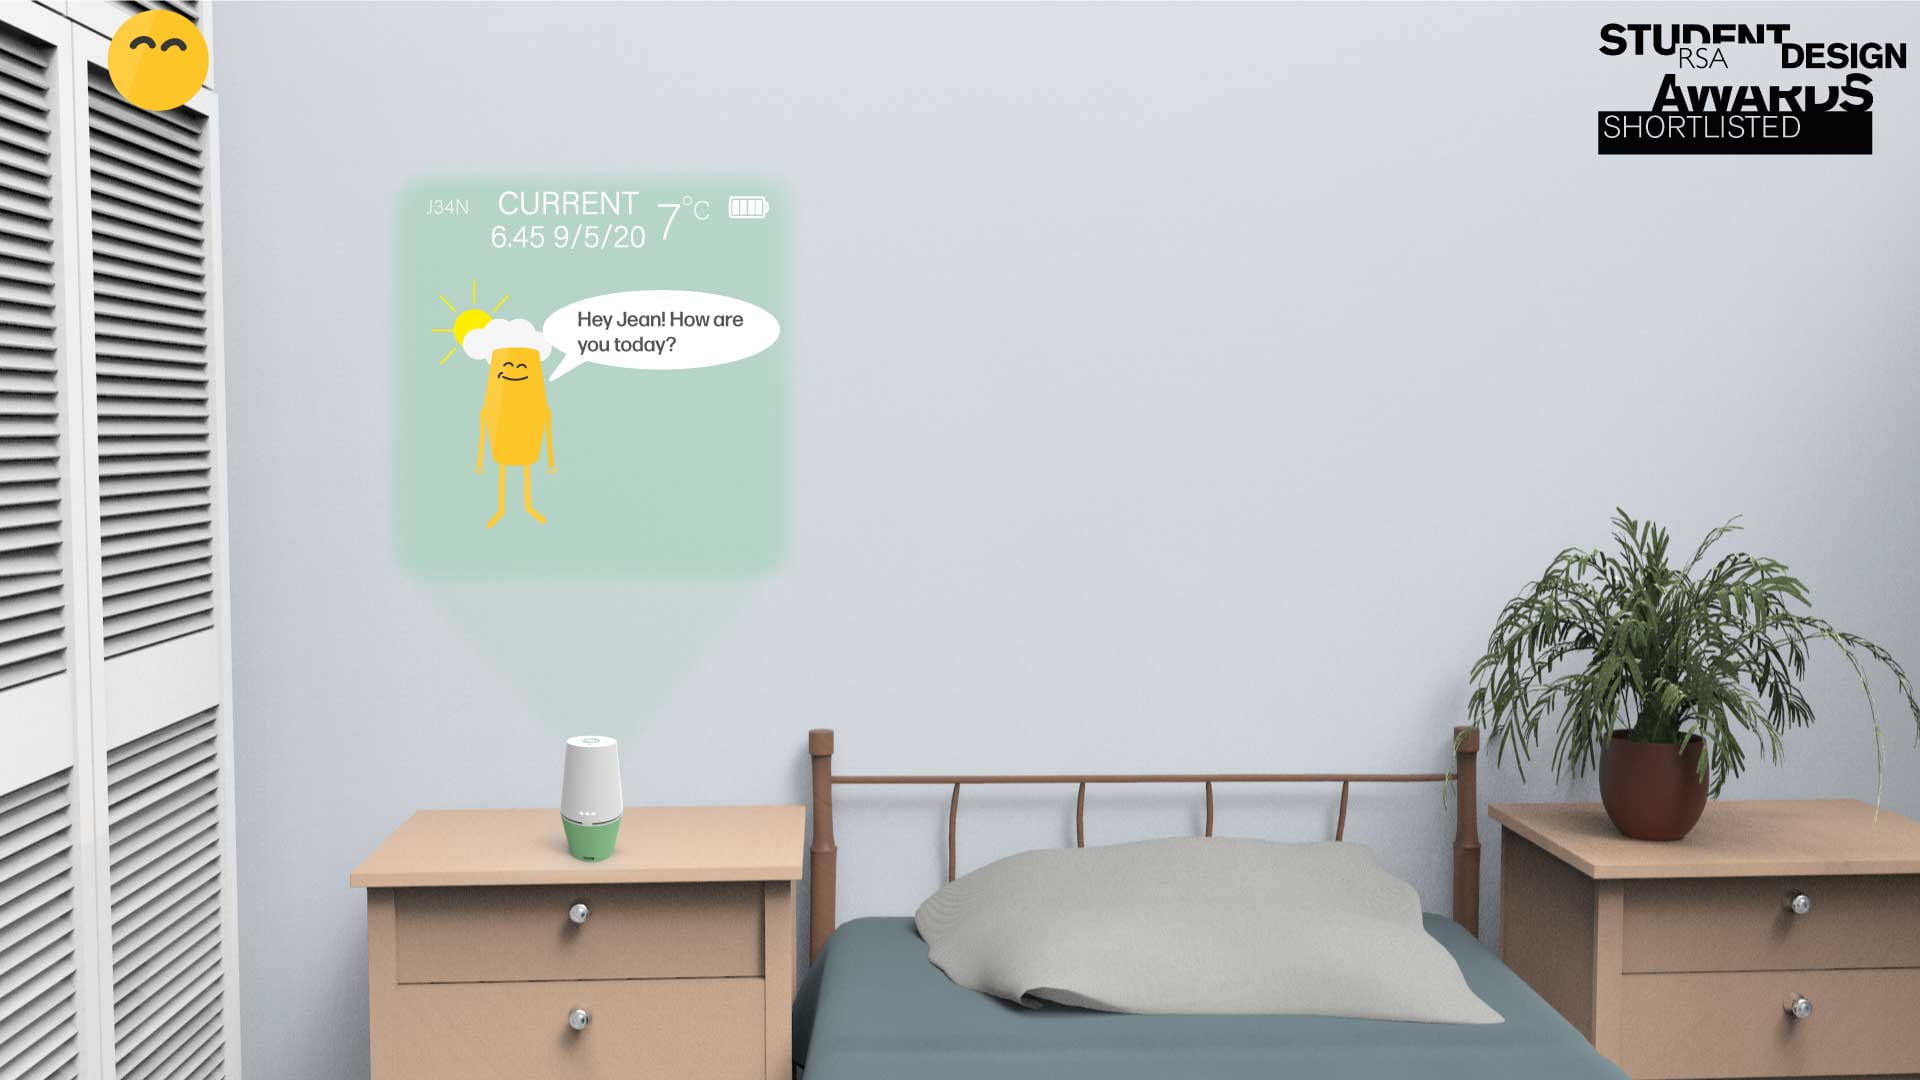 Wally supports the user, providing friendly dialect to check up on them, and connecting them to friends when they feel isolated.